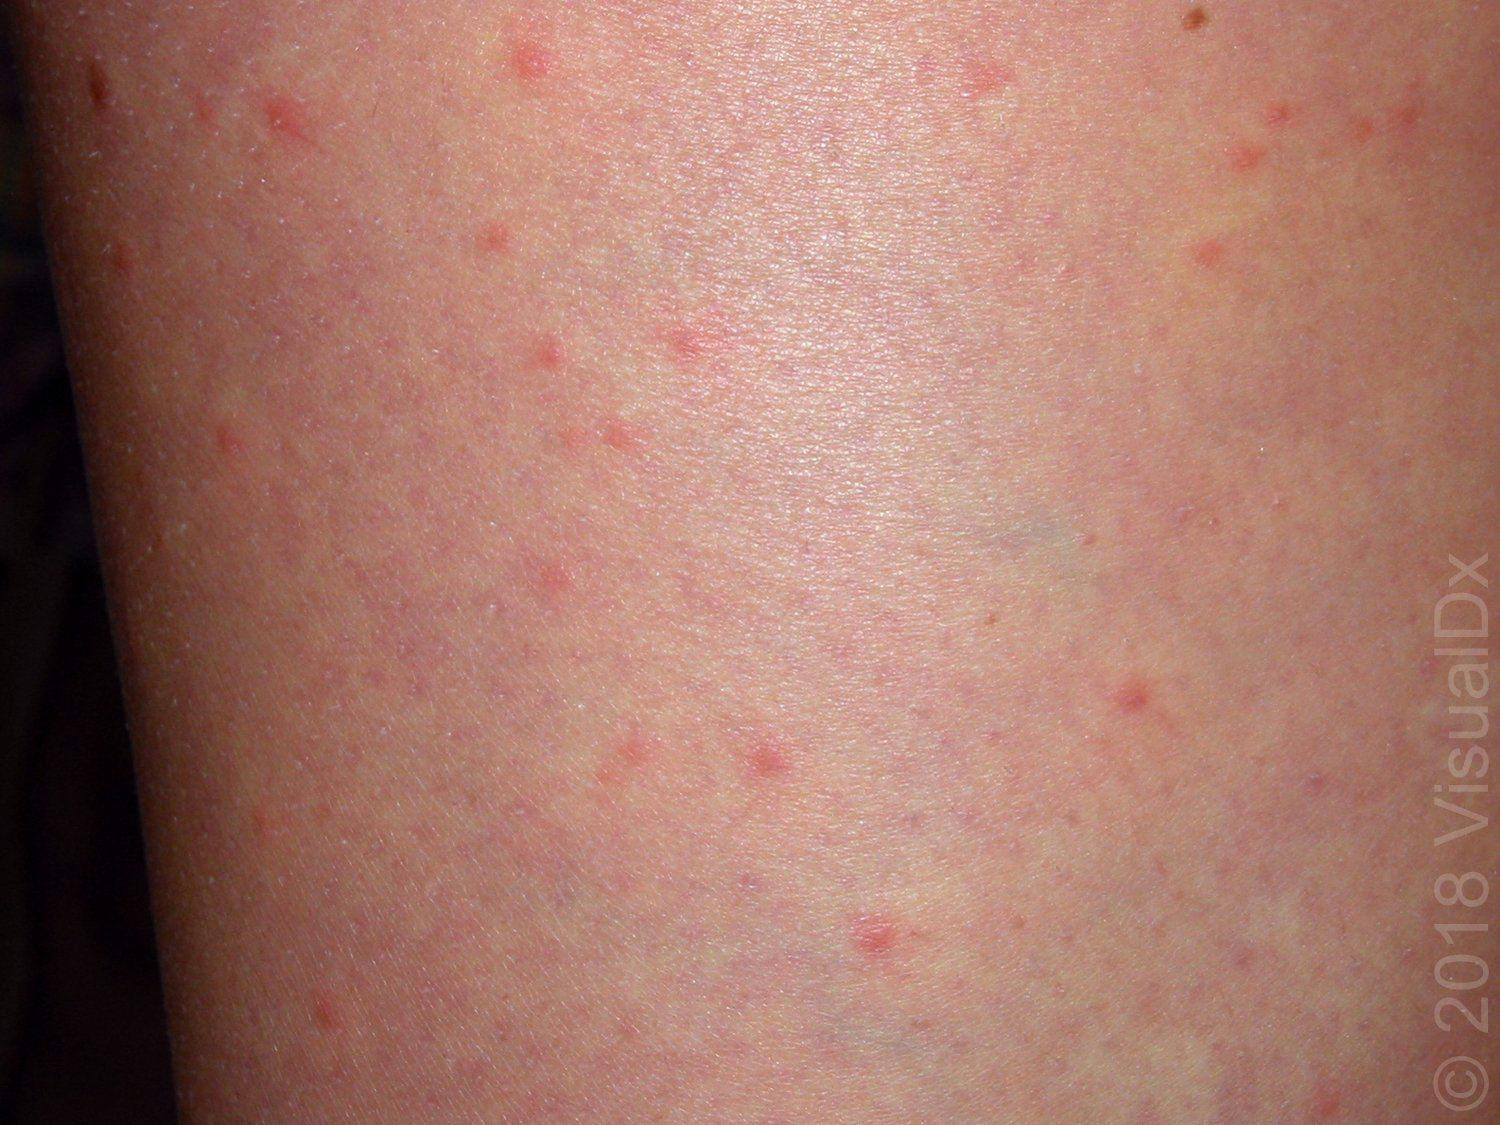 Image IQ: End of summer trip and a widespread rash